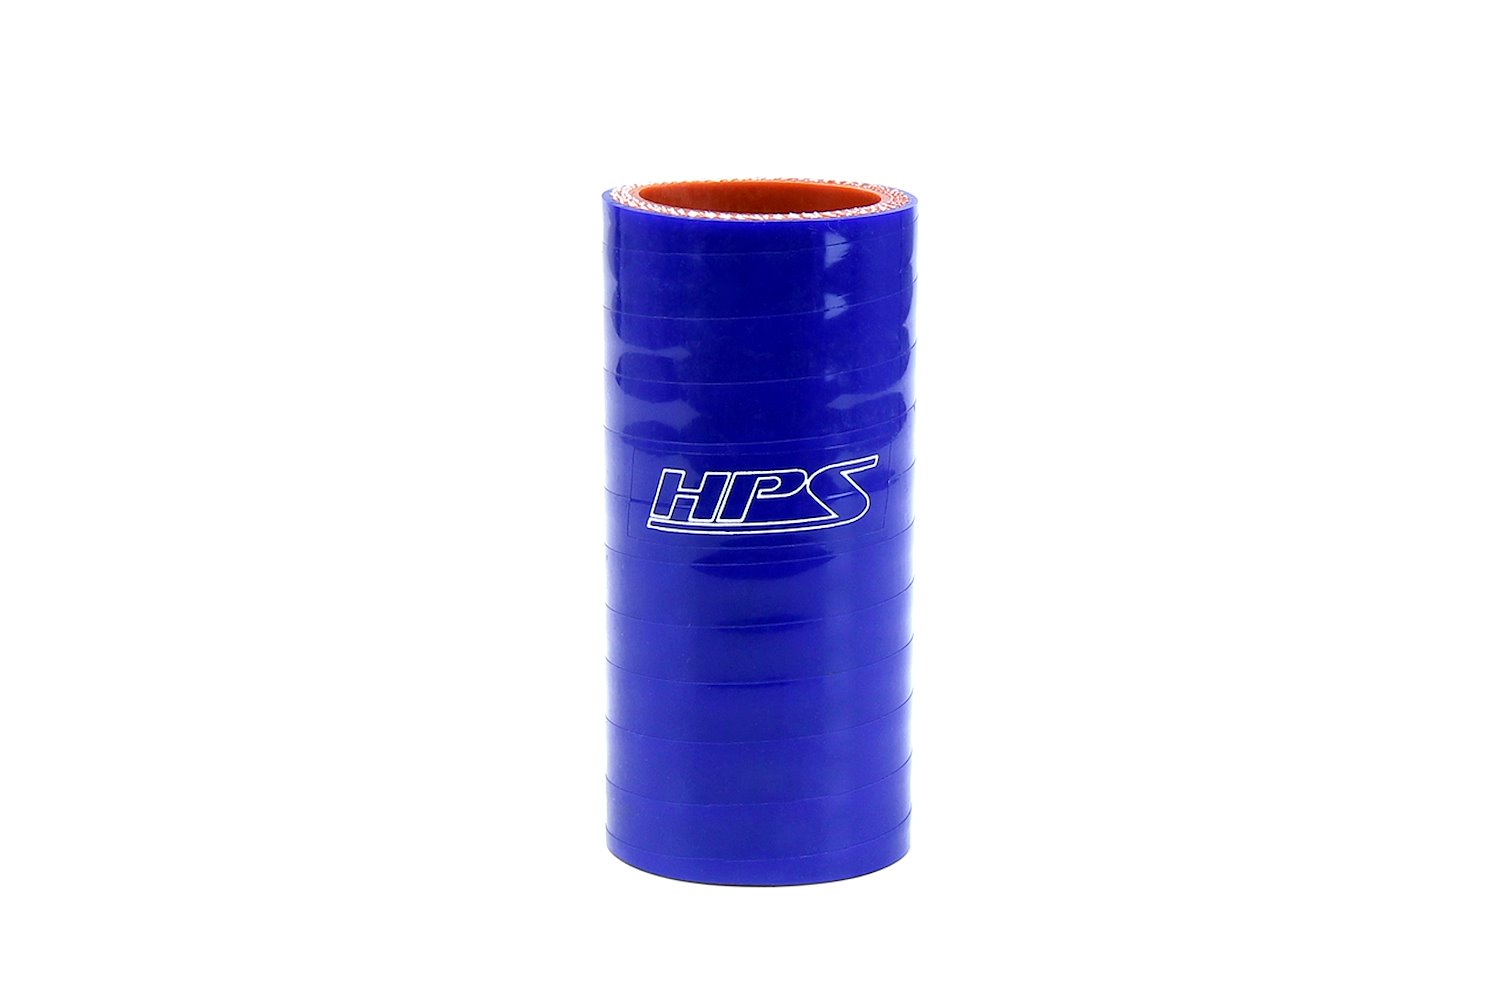 HTSC-138-L4-BLUE Silicone Coupler Hose, High-Temp 4-Ply Reinforced, 1-3/8 in. ID, 4 in. Long, Blue